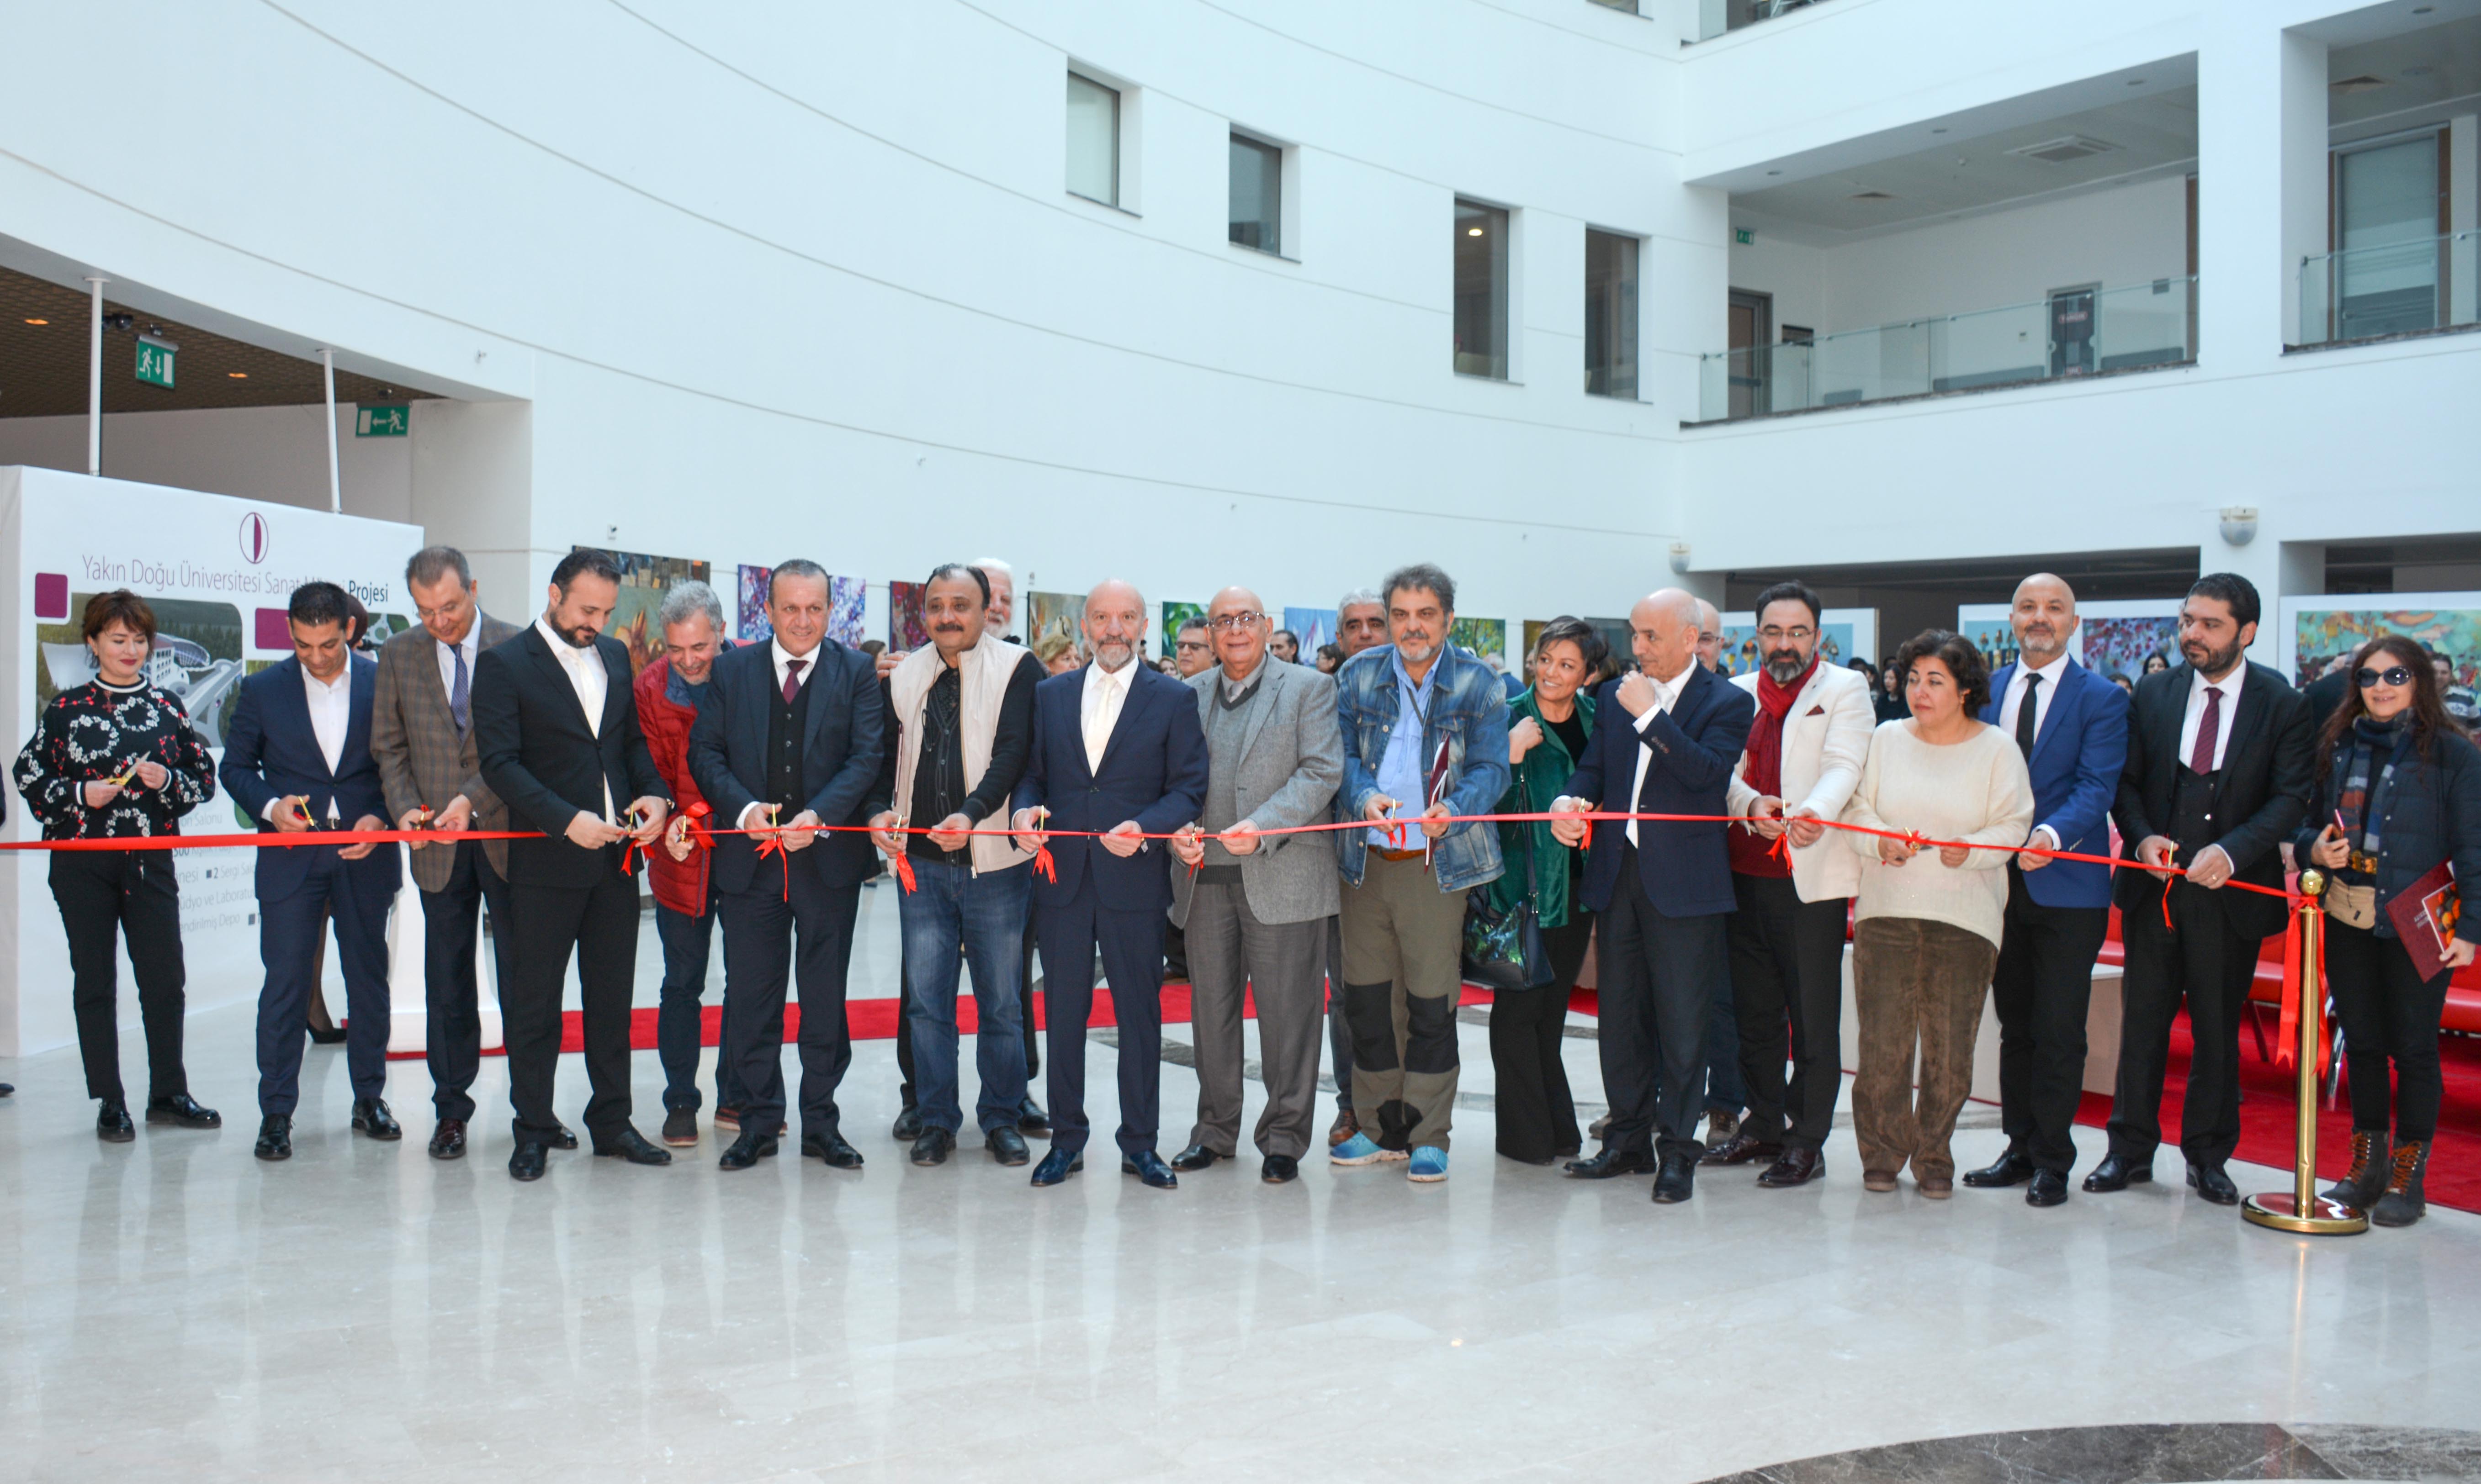 Featuring 40 artworks created by 14 Azerbaijani Artists for the Cyprus Museum of Modern Arts the Exhibition of Azerbaijani Artists was opened